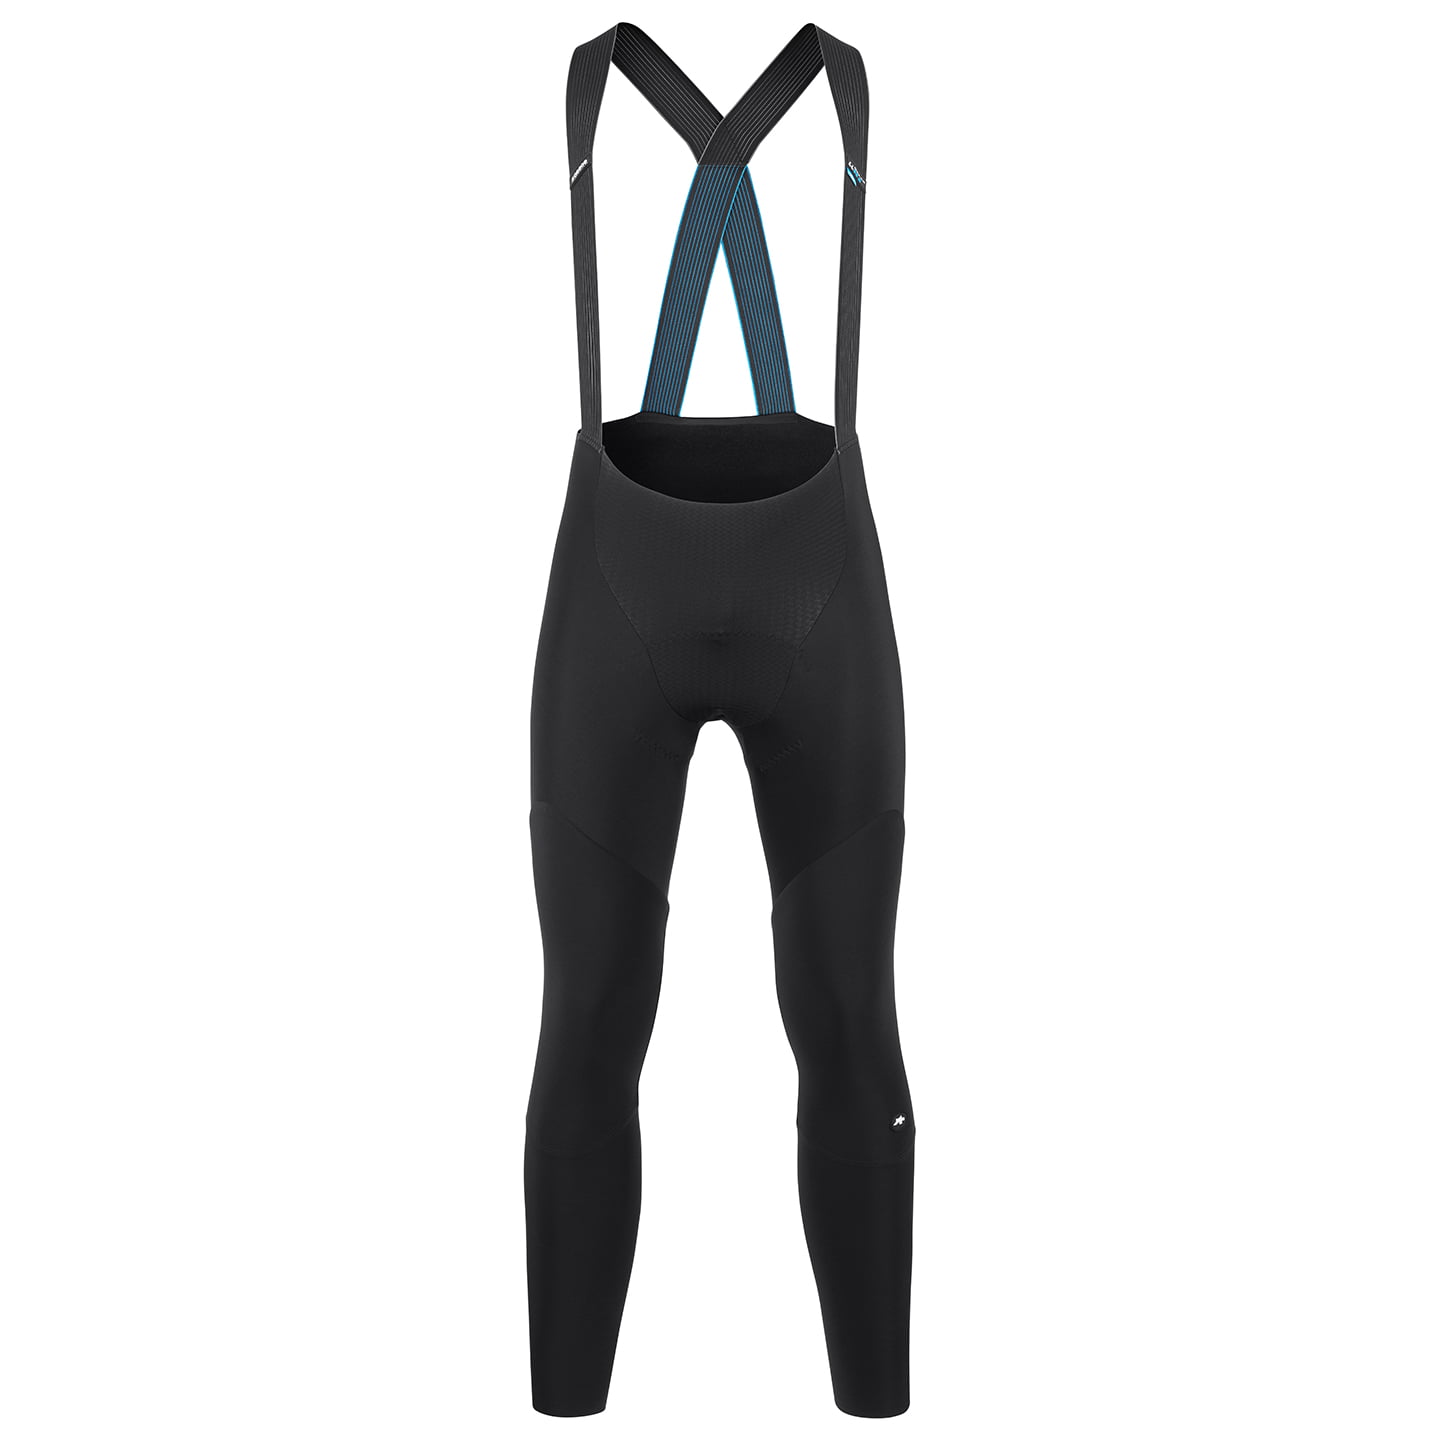 ASSOS Equipe R Habu Winter S9 Bib Tights Bib Tights, for men, size S, Cycle trousers, Cycle clothing